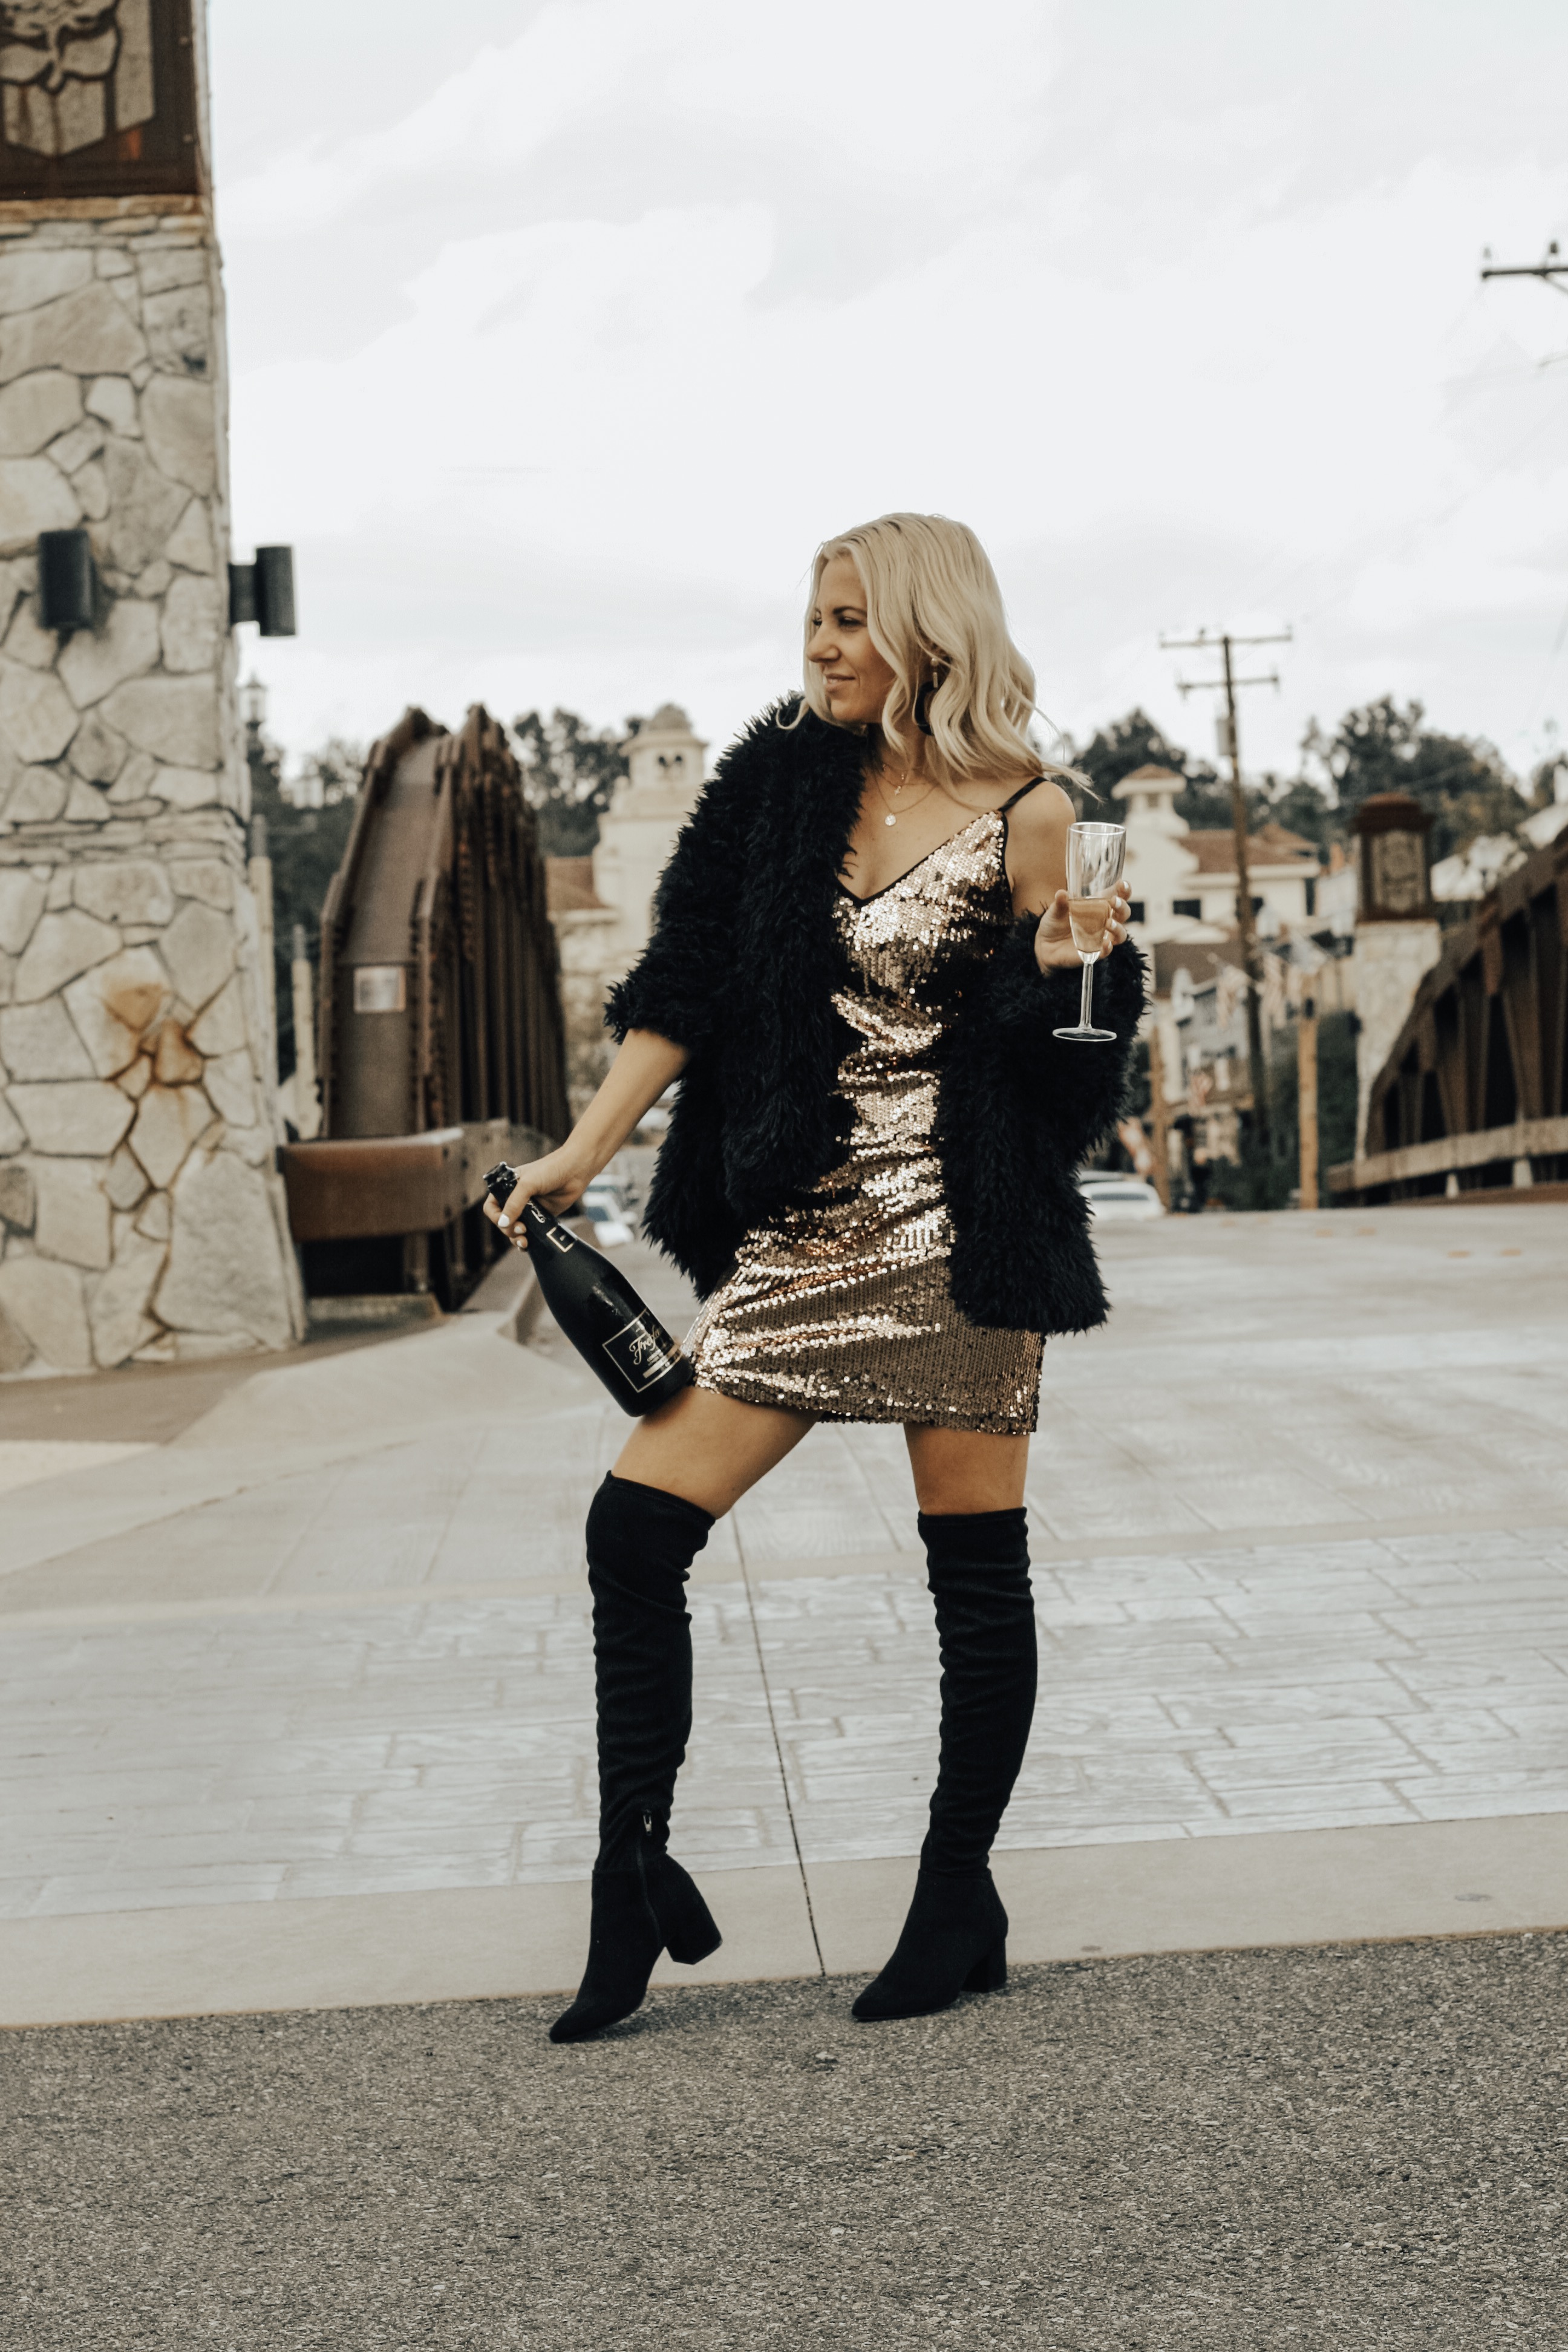 NYE PARTY LOOKS- Jaclyn De Leon Style + New Years Eve party dress + champagne + celebrate + street style + party outfit + sequin dress + cocktail dress + winter style + OTK boots + target style + affordable fashion + mom style + cozy faux fur jacket + mini dress